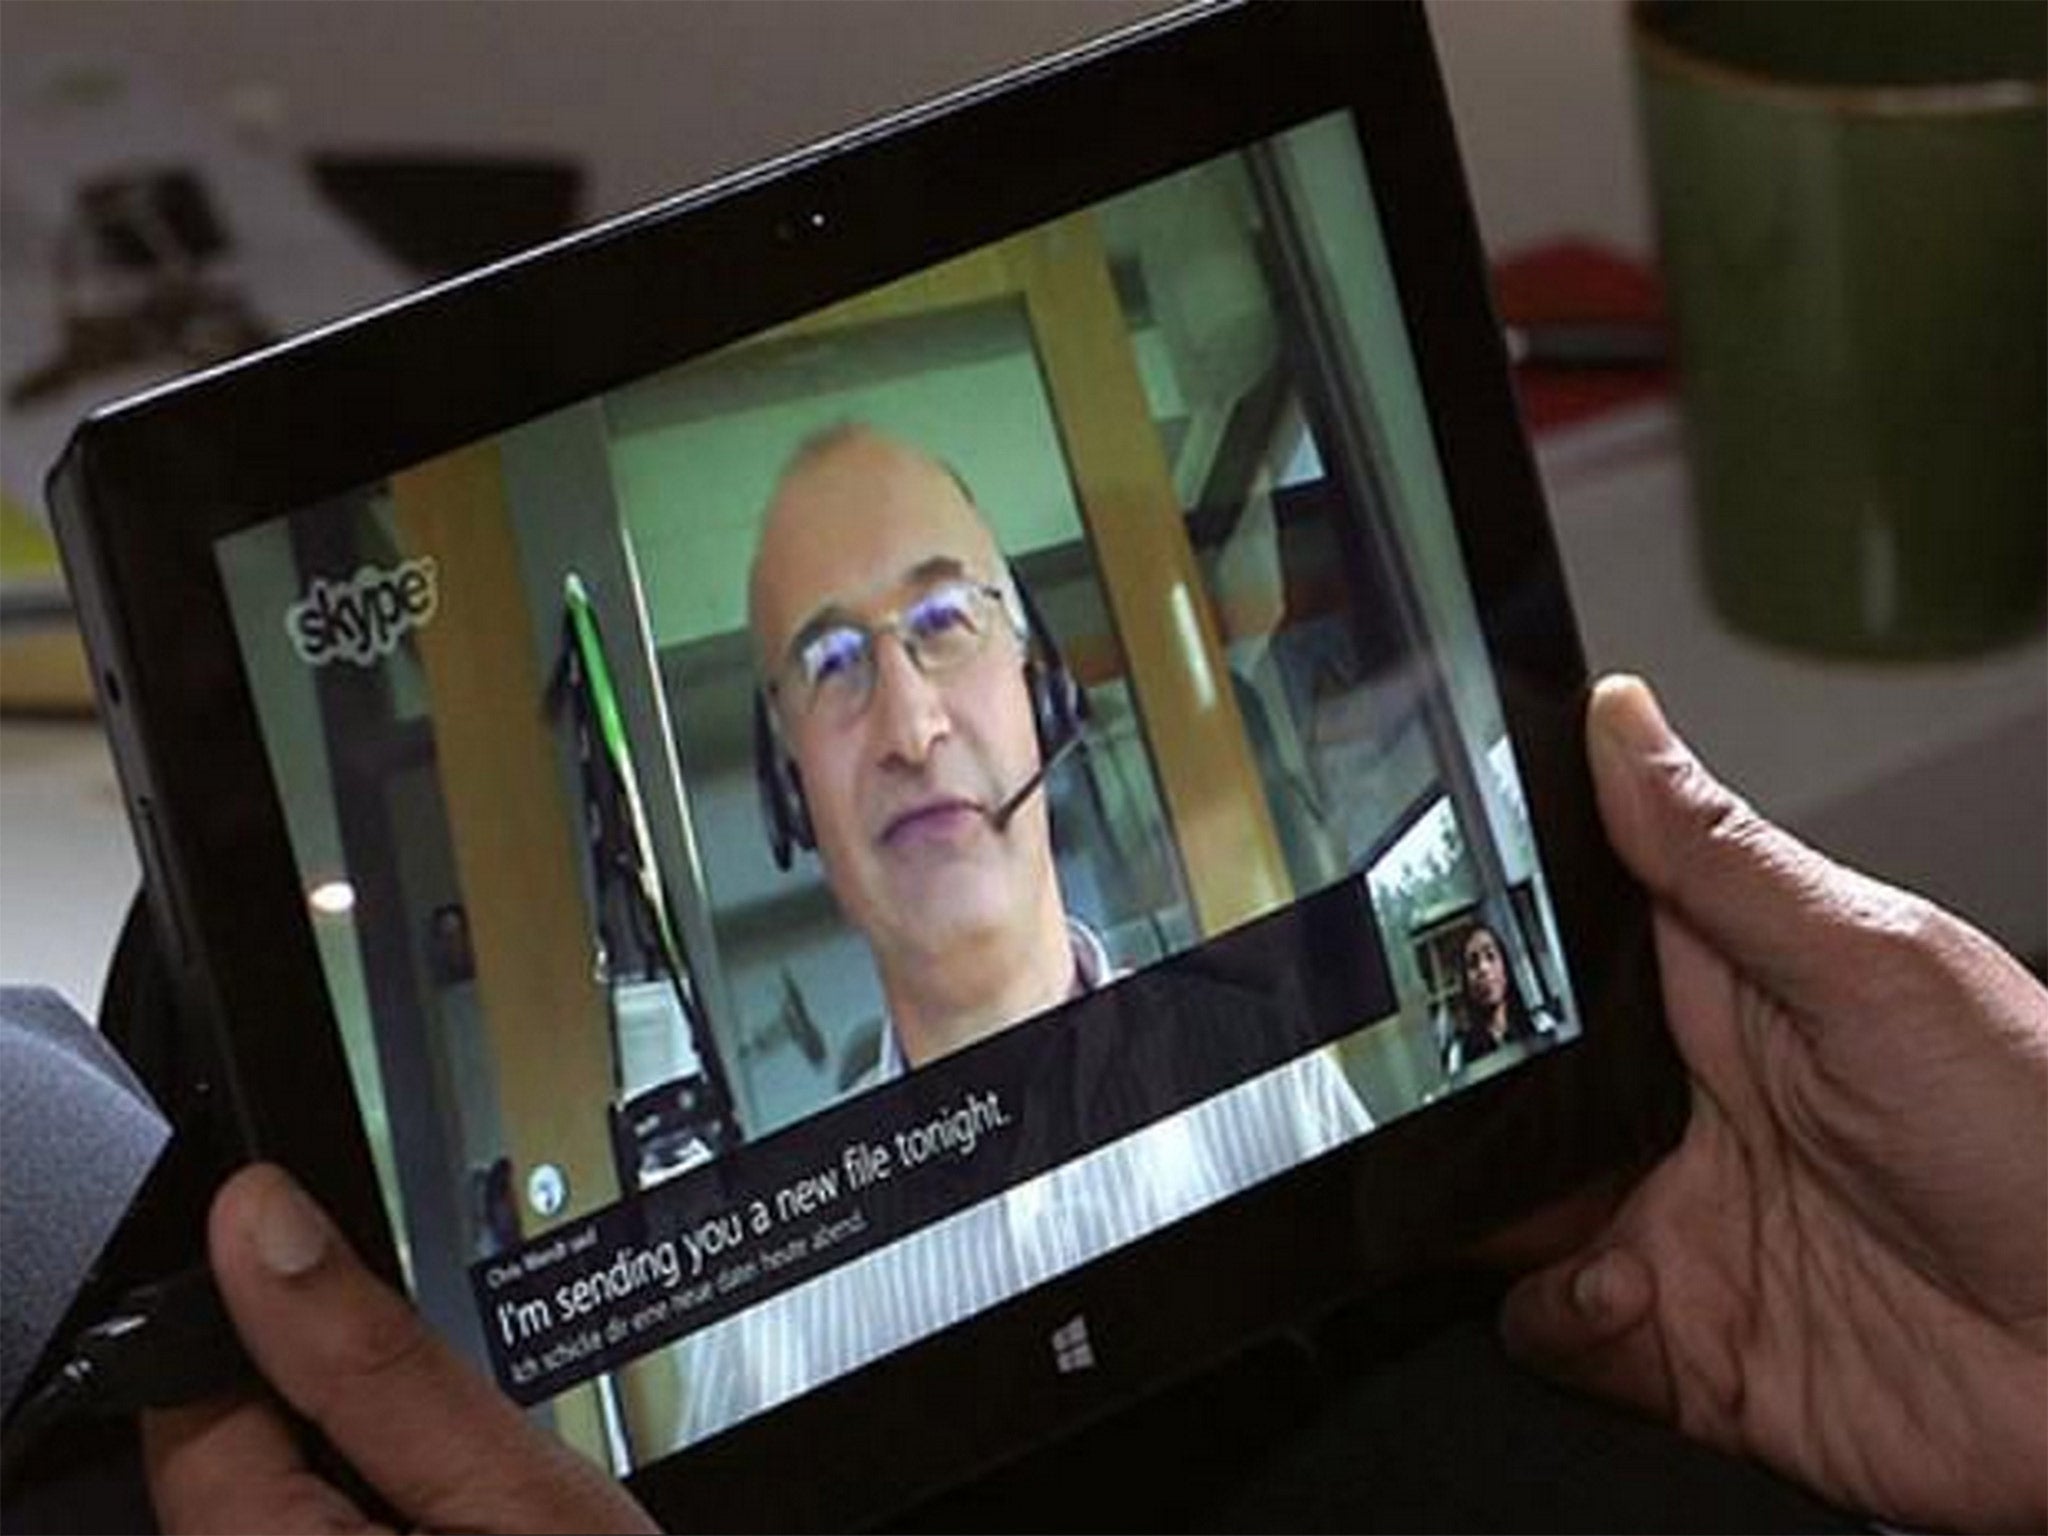 Multilingual: the Skype Translator in action